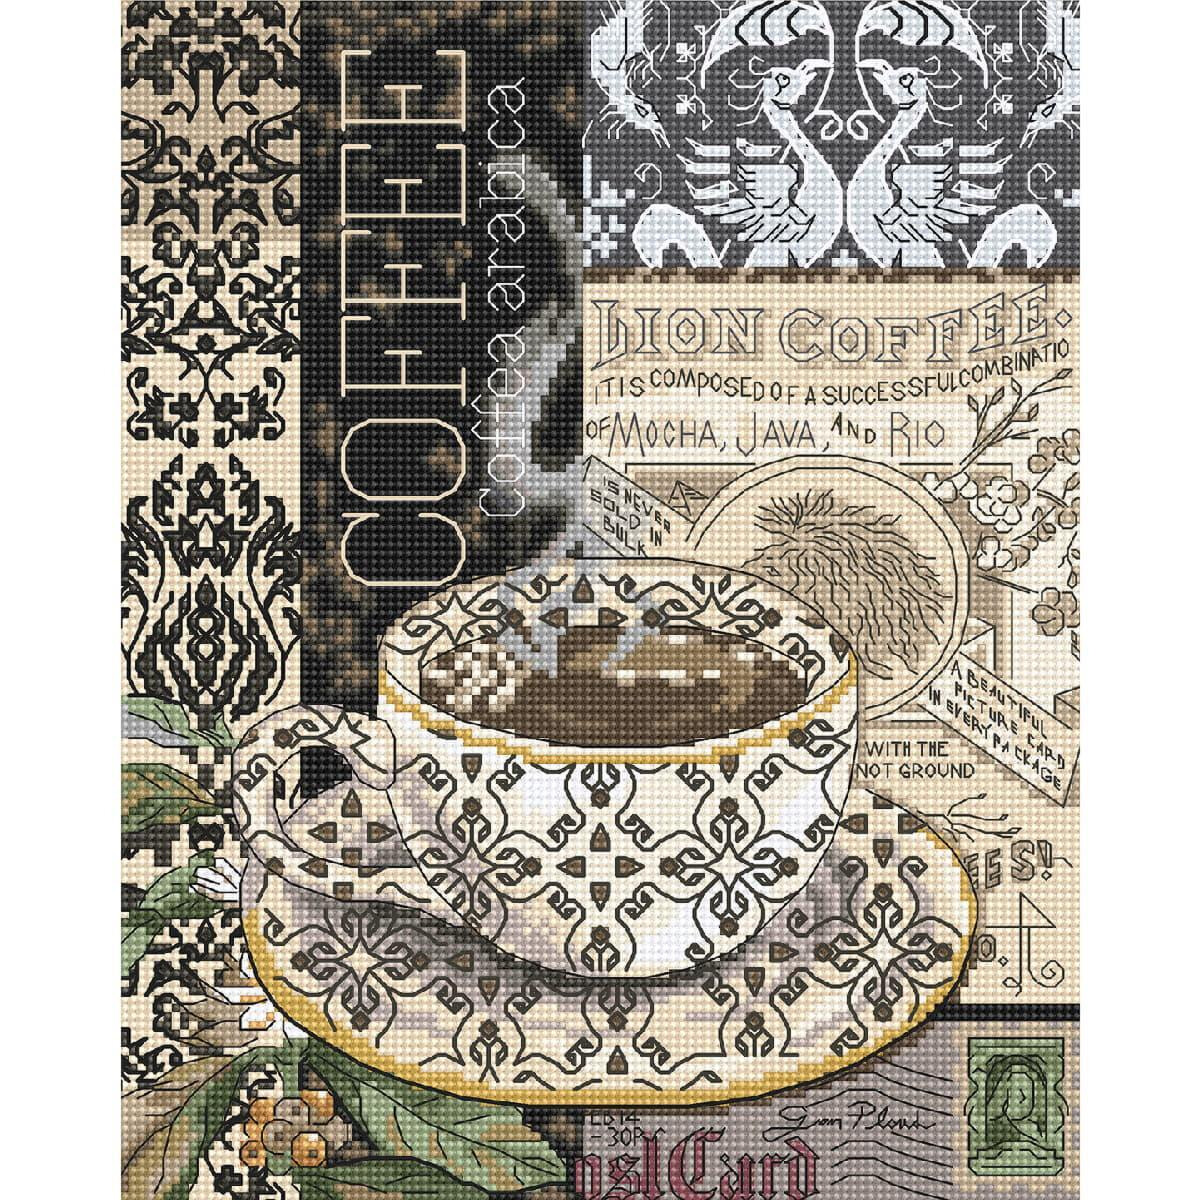 Letistitch counted cross stitch kit "Lion Coffee...